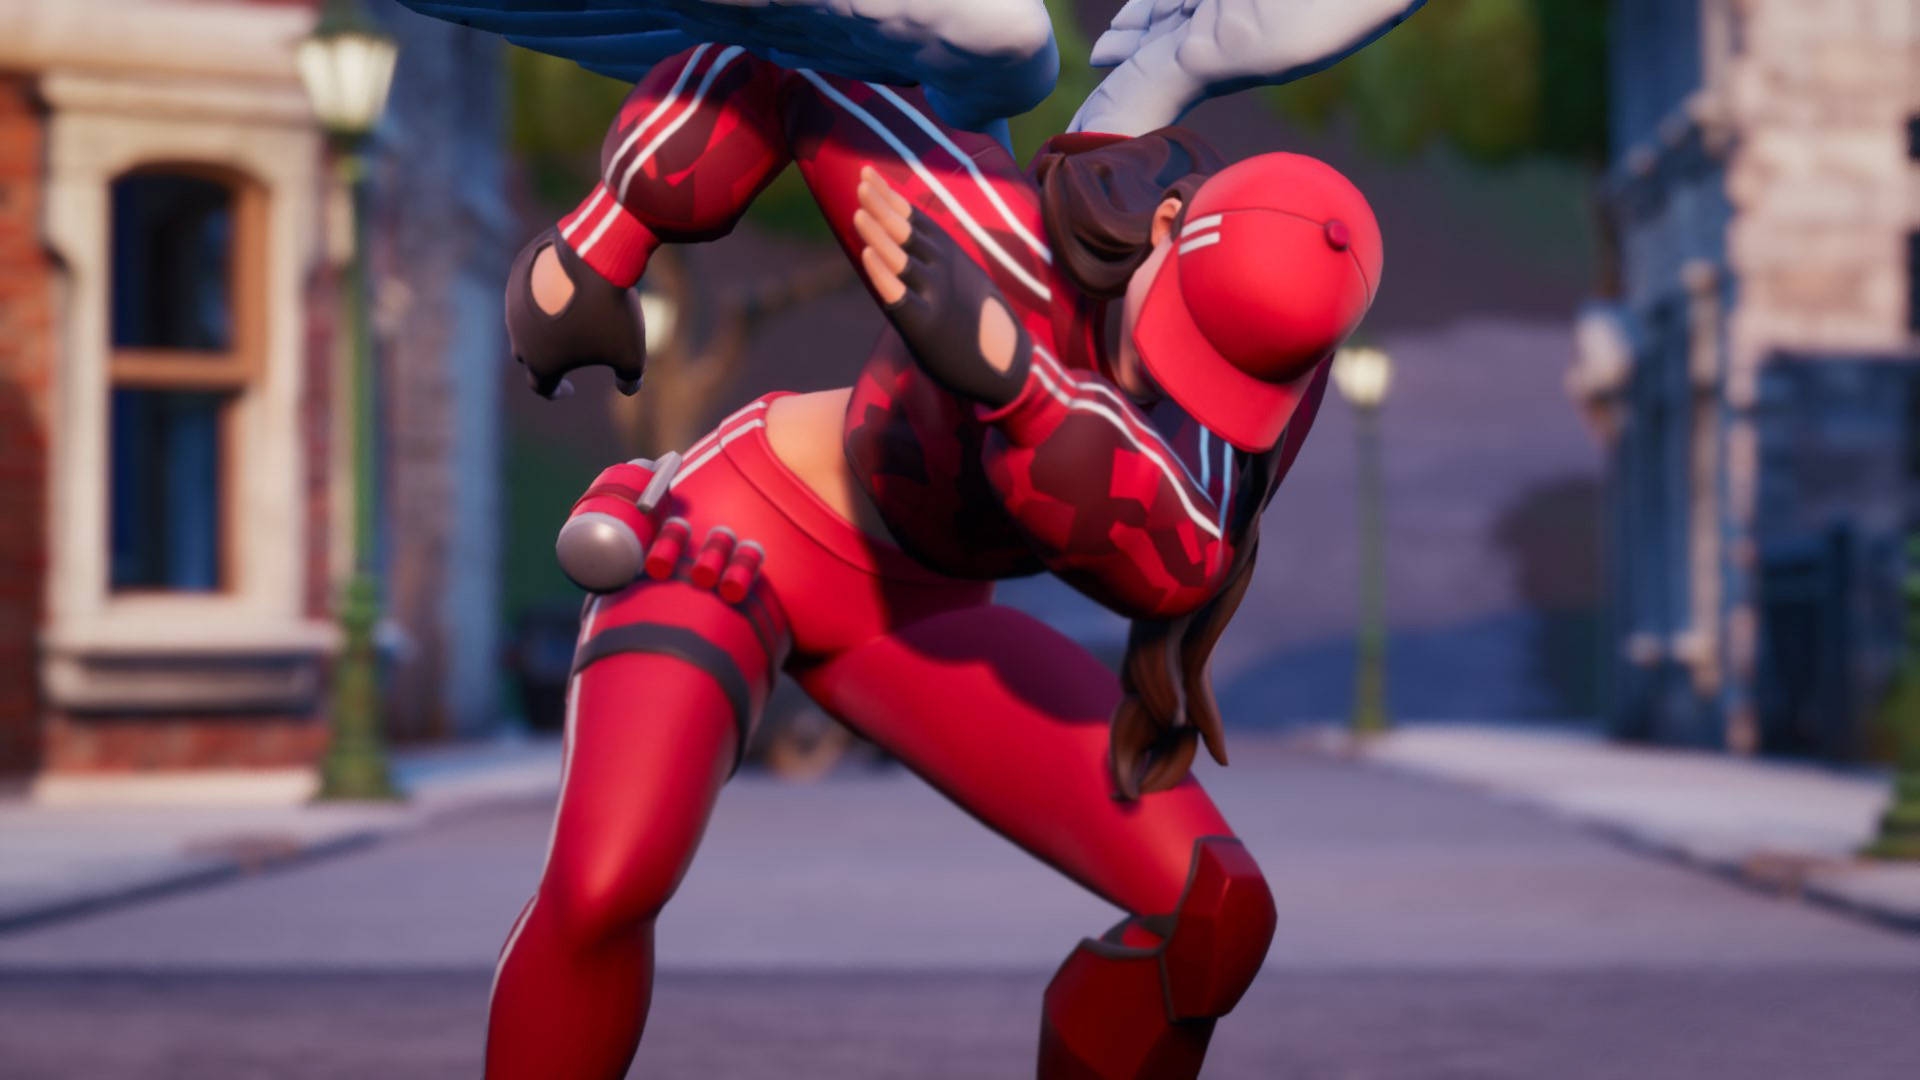 Ruby Fortnite In Dab Pose Background